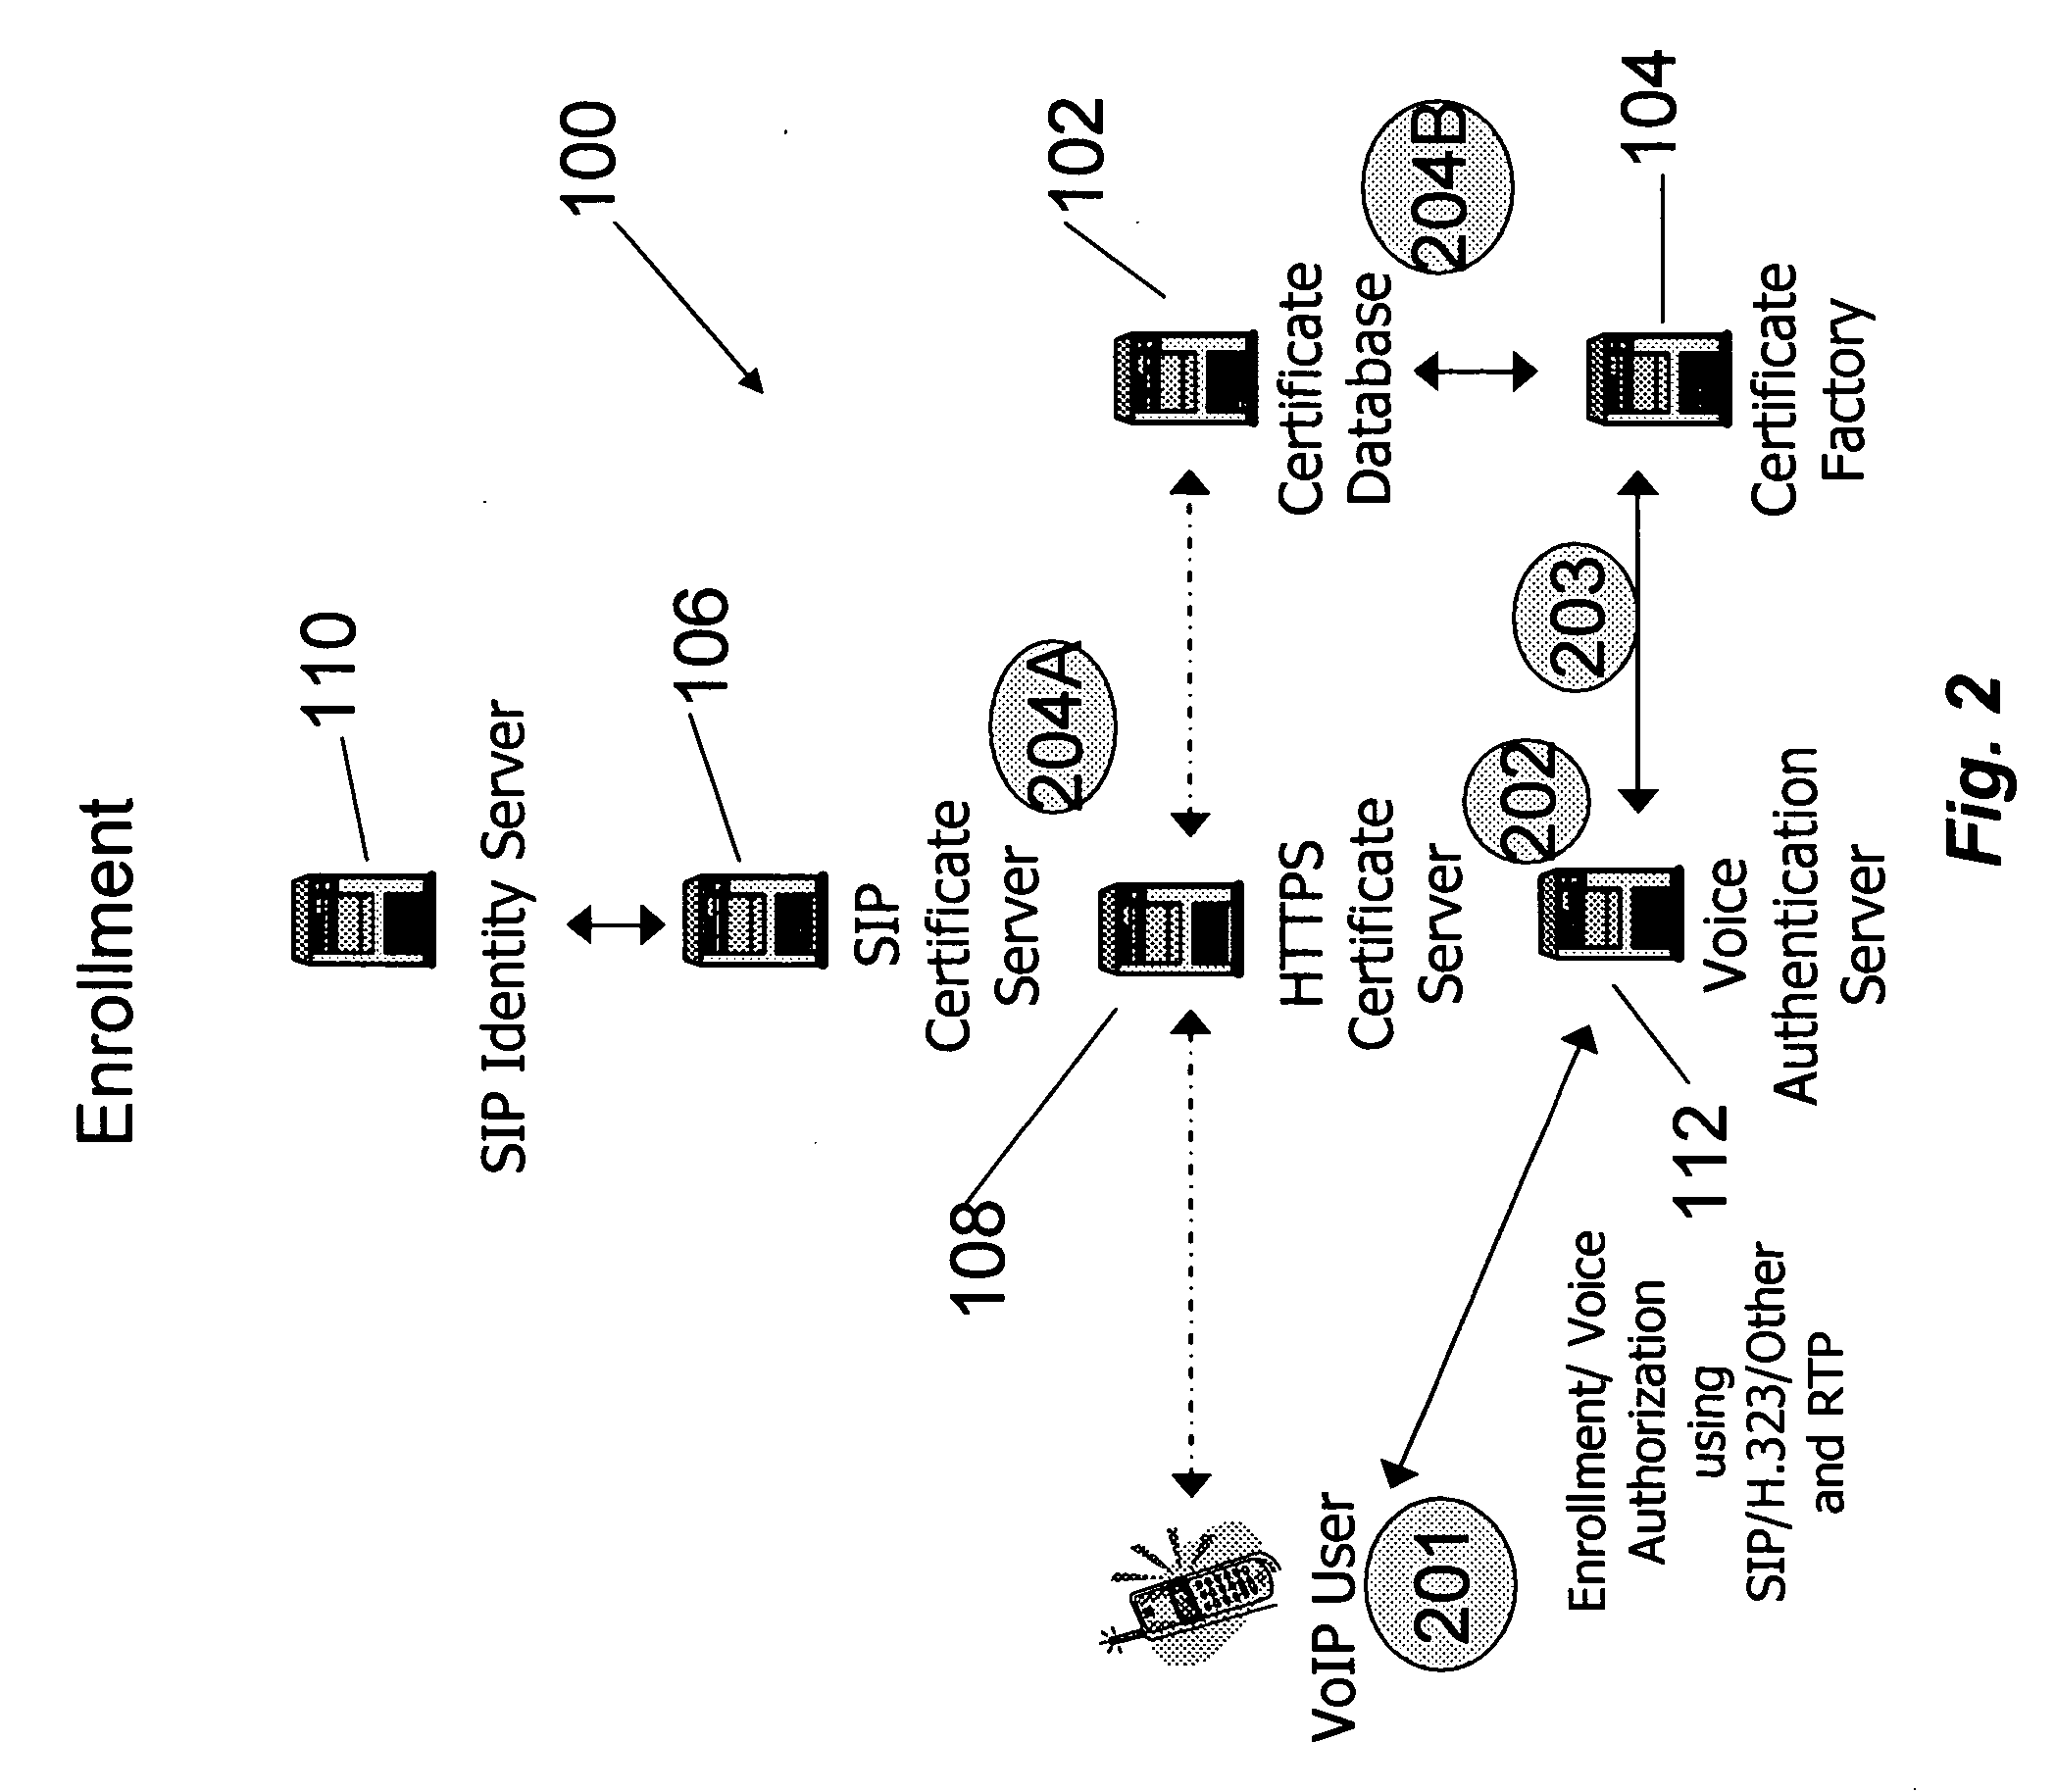 System and method for securely storing and accessing credentials and certificates for secure VoIP endpoints